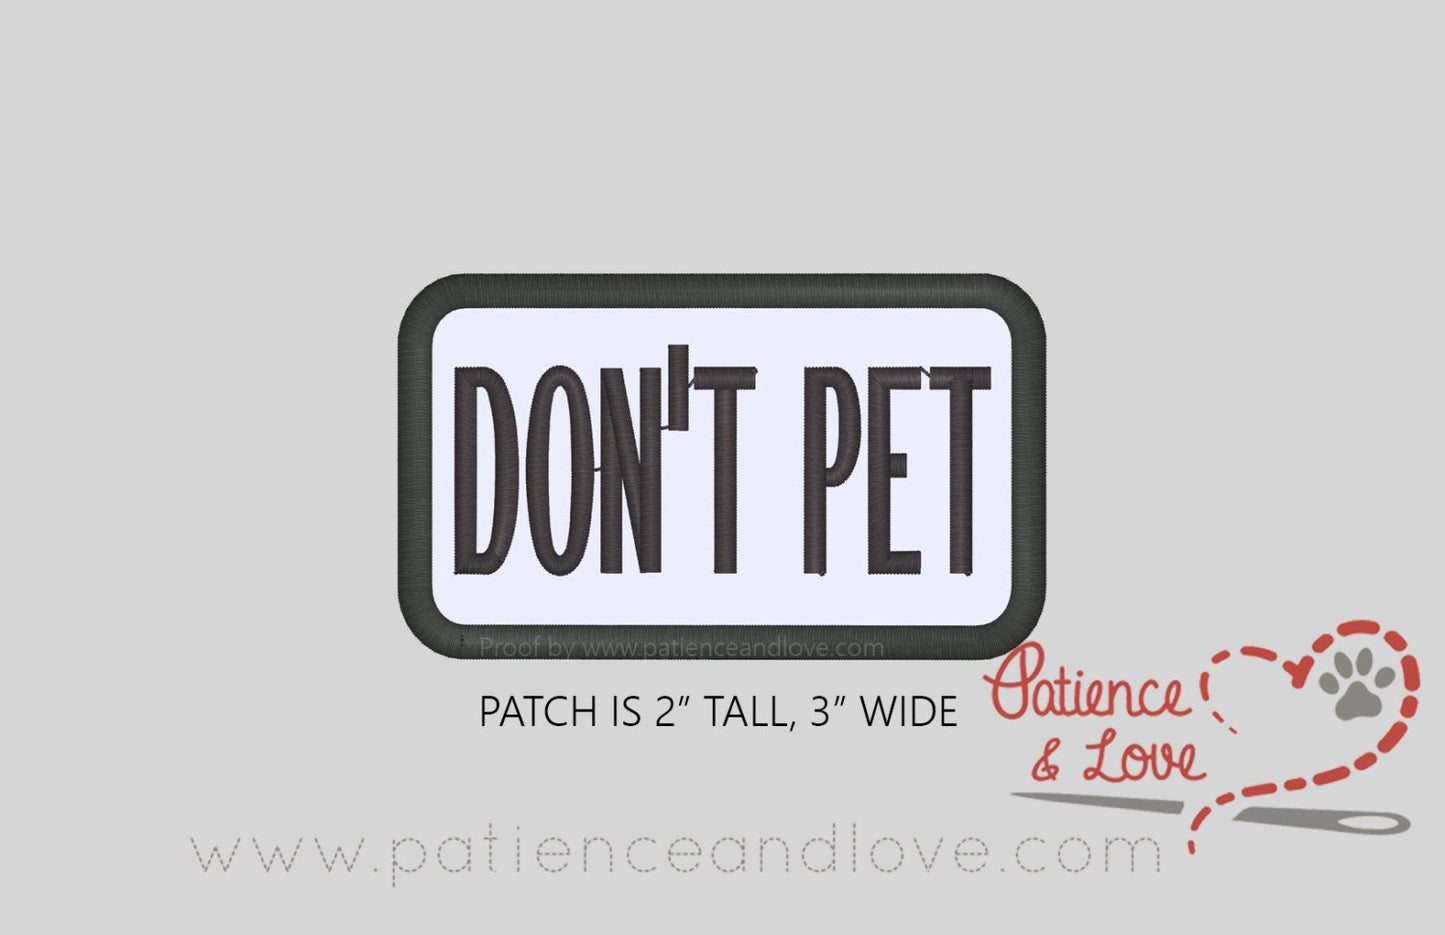 Don't Pet, 3 inch x 2 inch rectangle patch